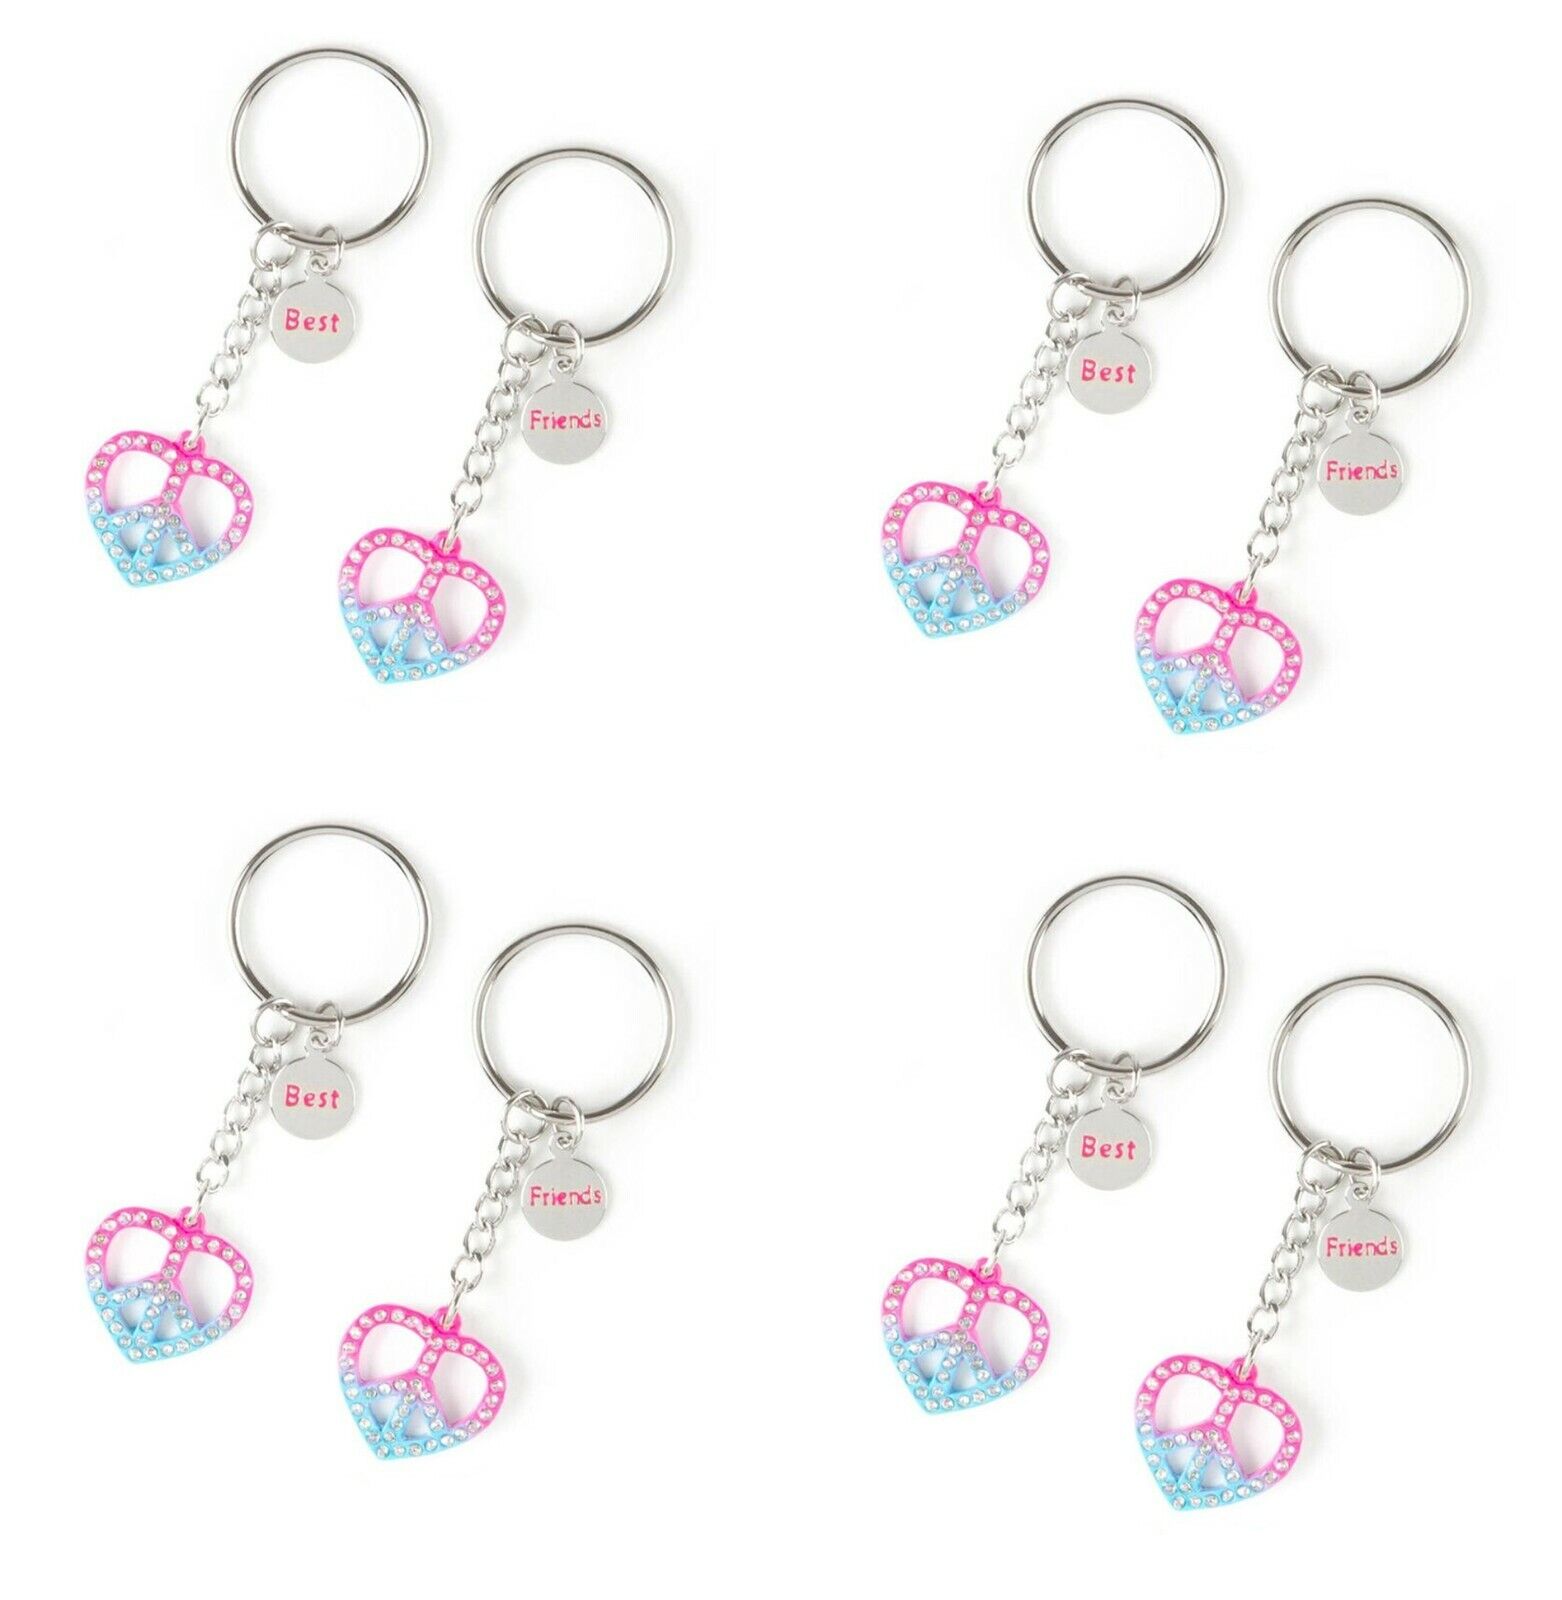 4 Best Friends Ombre Rhinestone Pink Blue Peace Heart Key Chains Rings Set 2 BFF Claire’s